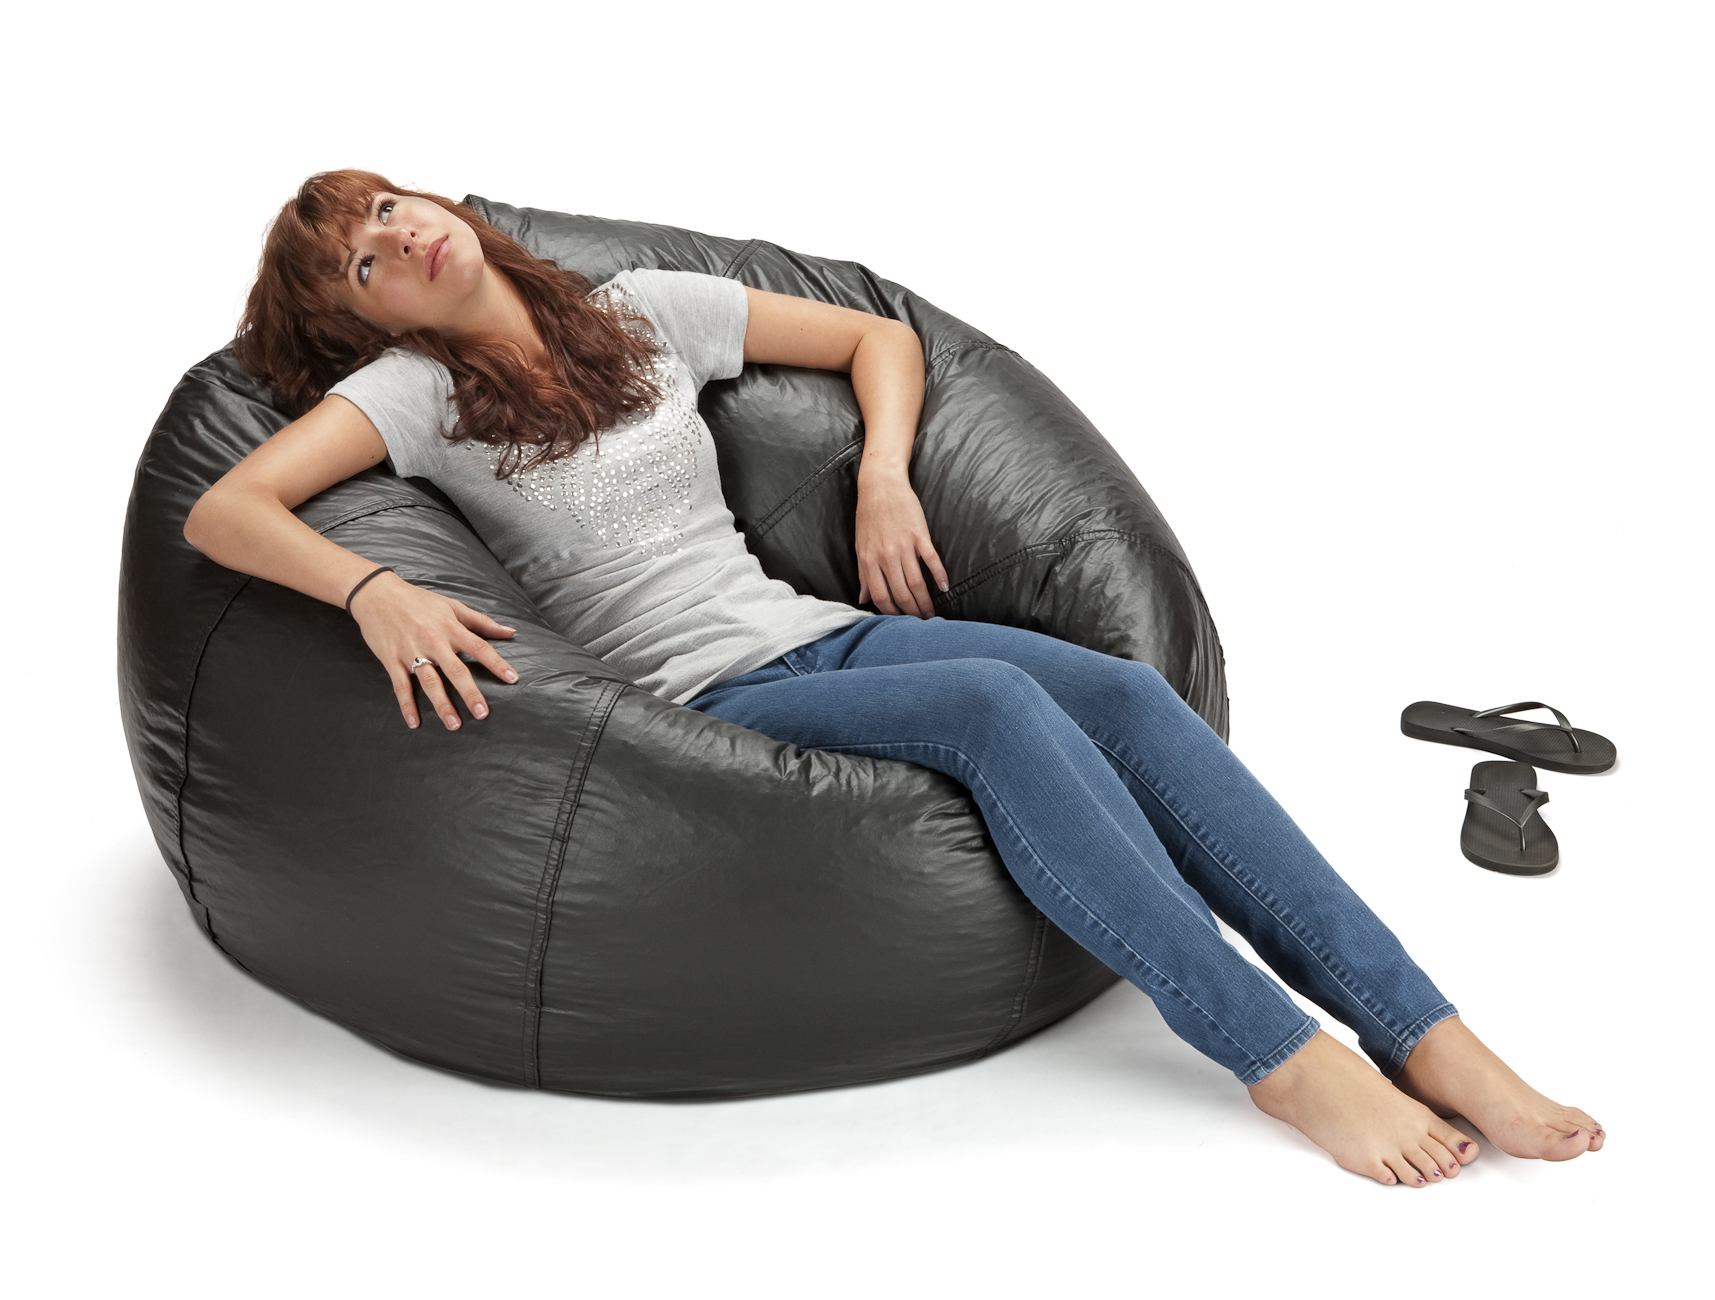 ACEssentials132" Round Extra Large Shiny Bean Bag, Multiple Colors - image 4 of 4